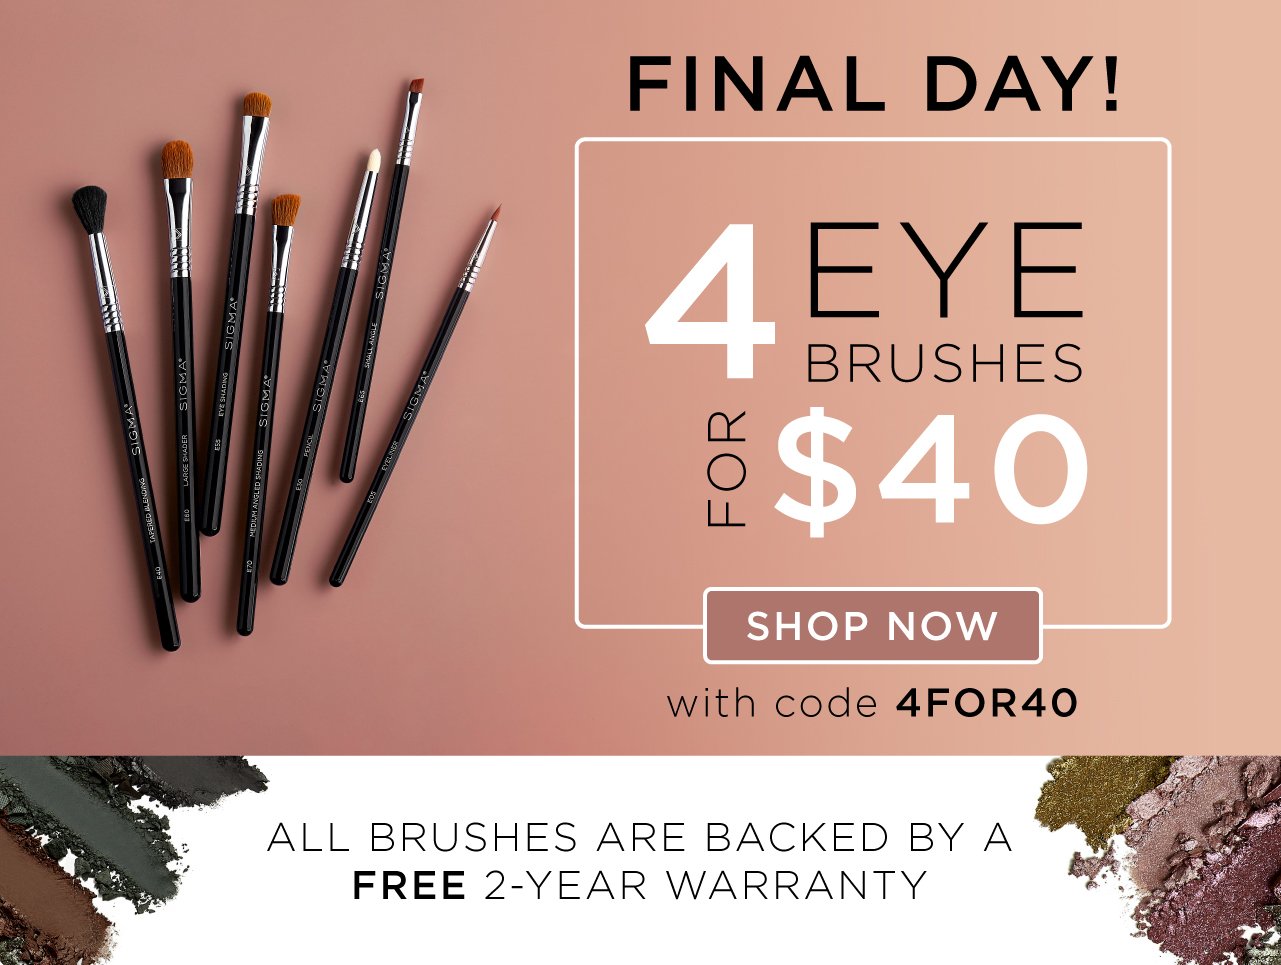 Final Day! Use code 4FOR40 on any 4 Eye Brushes